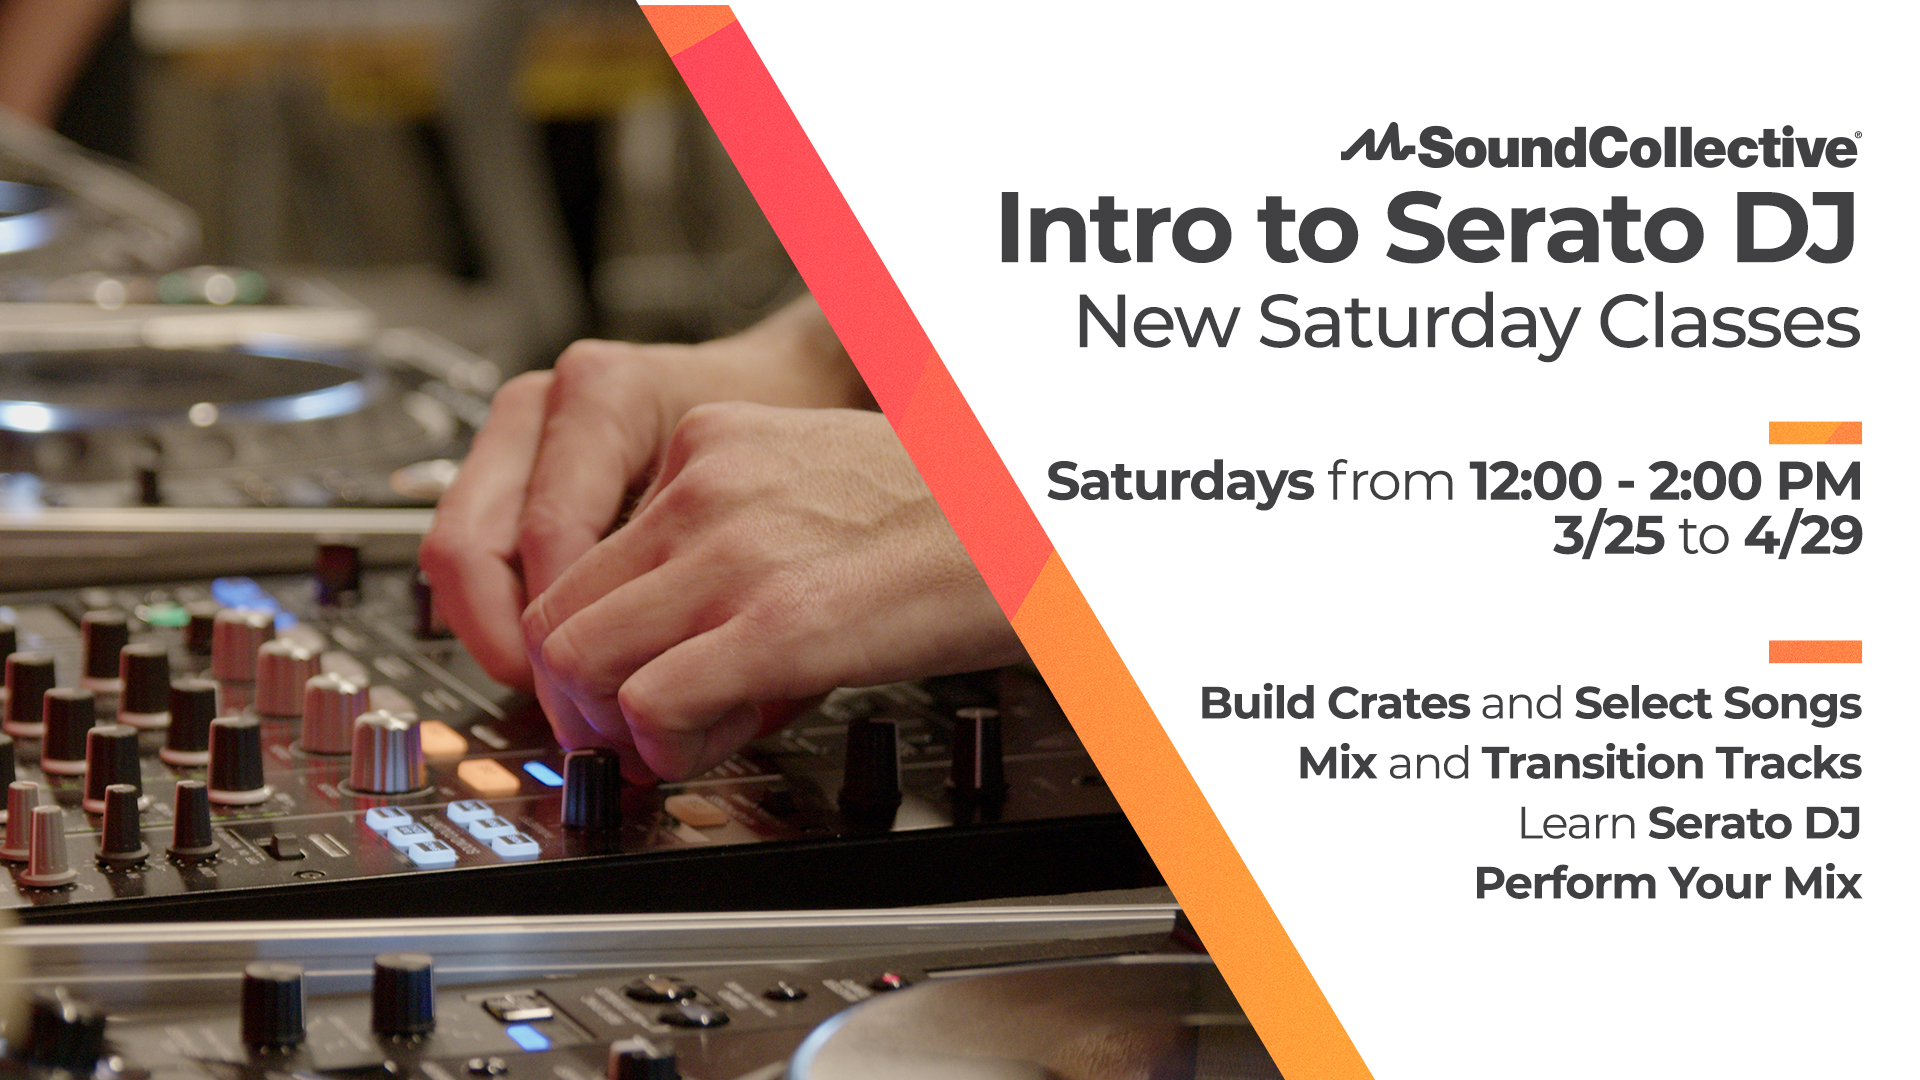 Intro to Serato DJ flyer with a DJ scratching on turntables